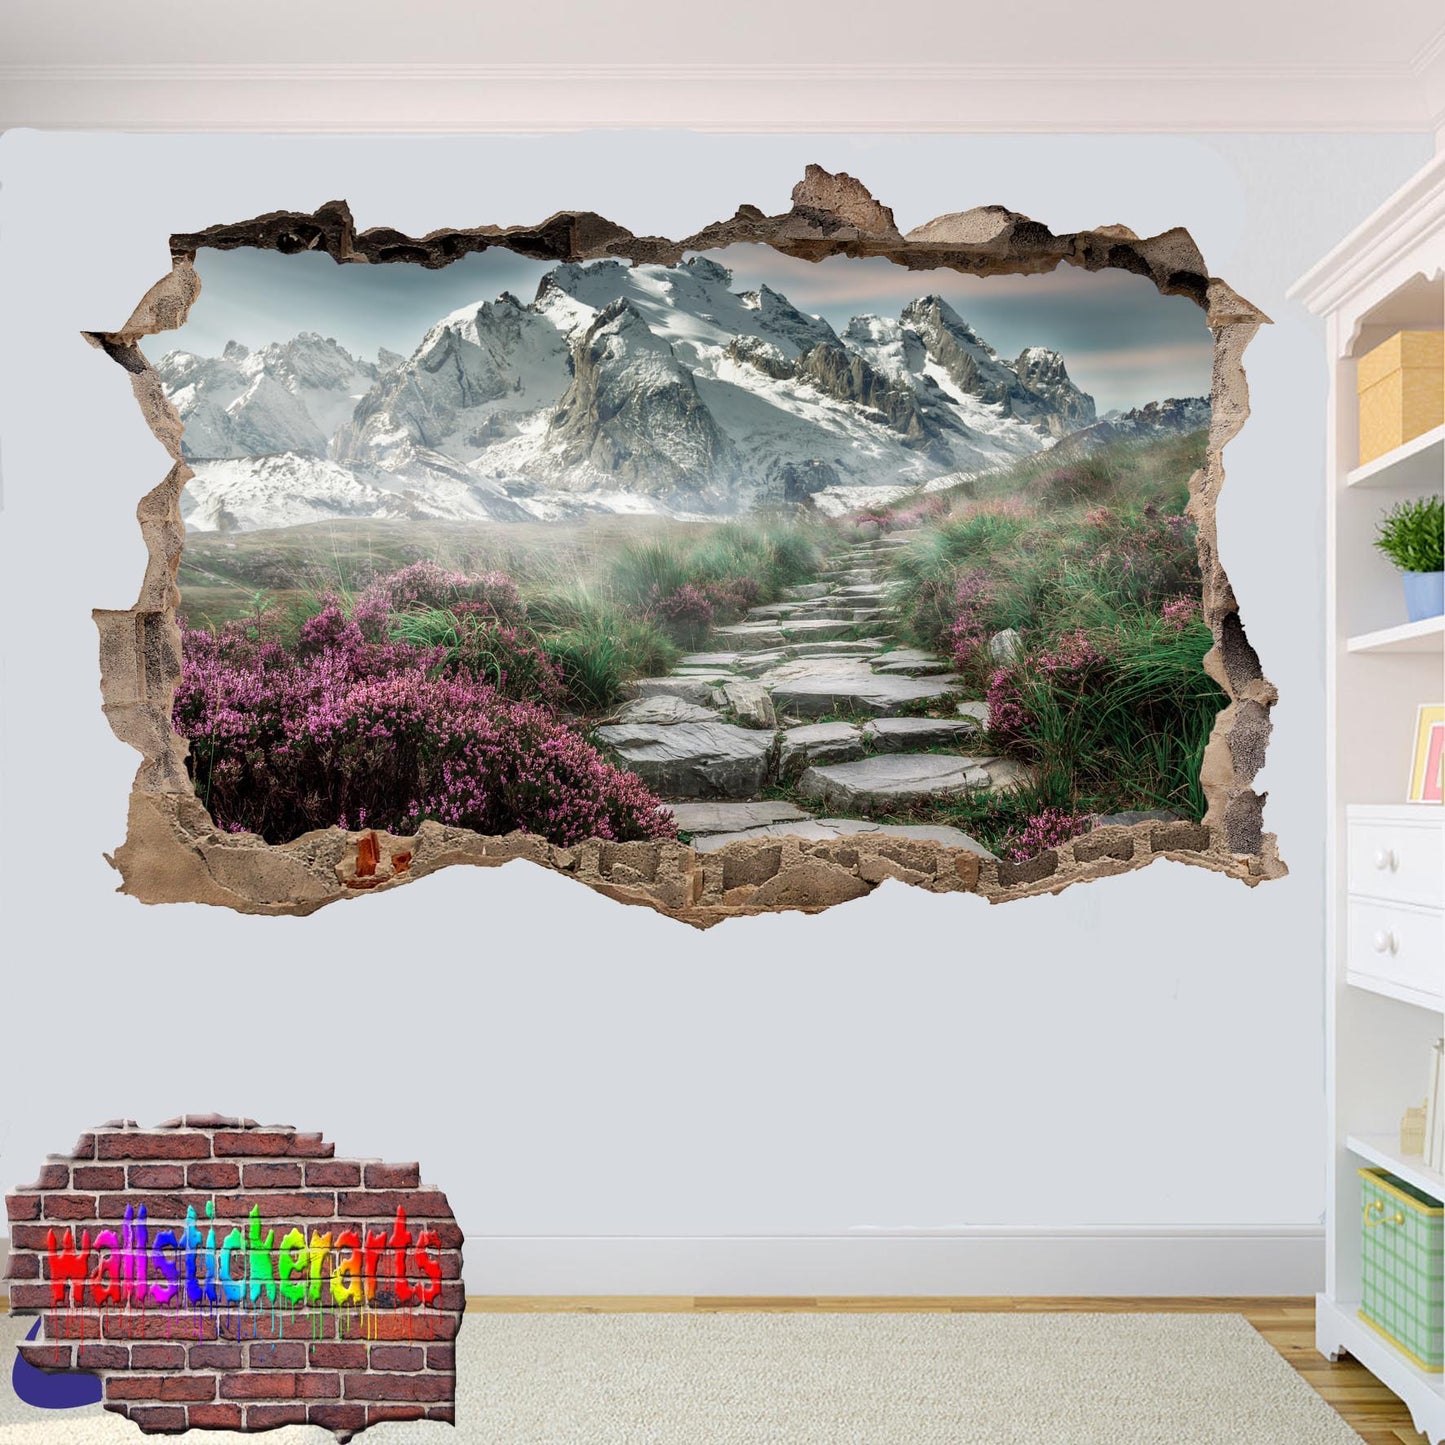 Snowy Mountains Path Flowers 3d Art Wall Sticker Mural Room Office Shop Home Decor Decal YV7